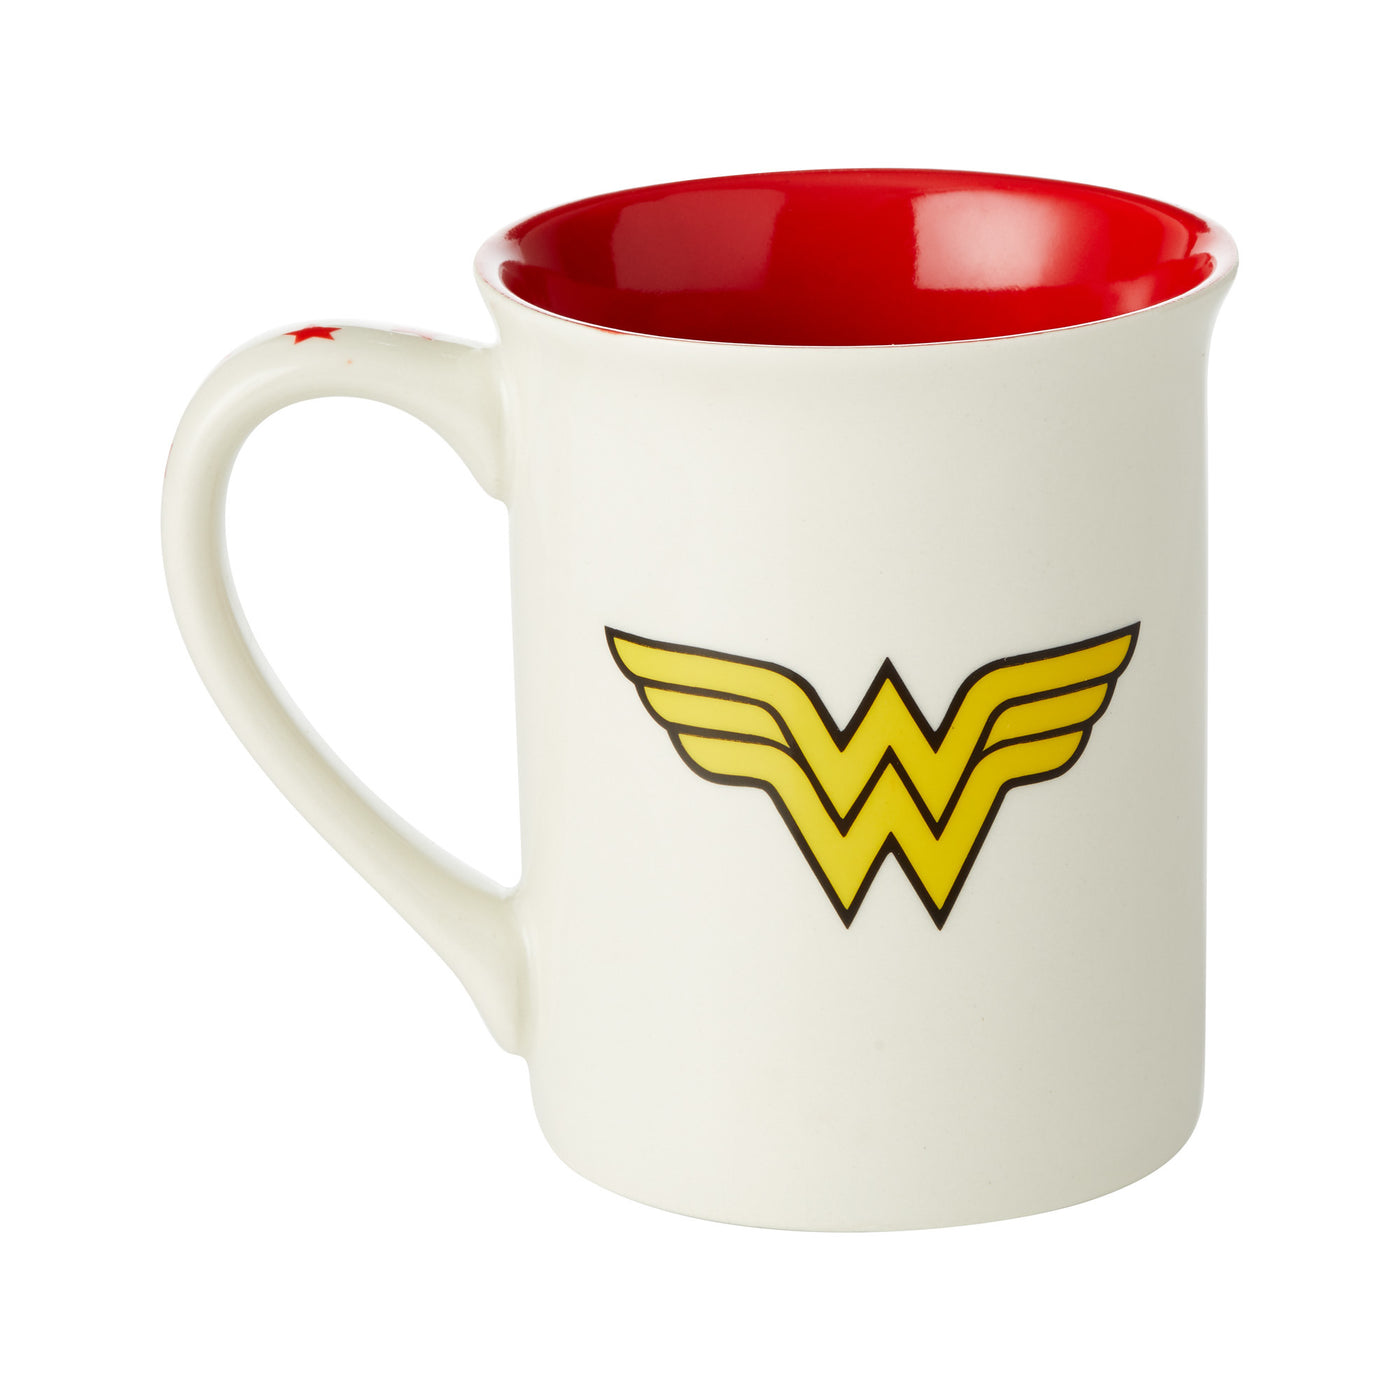 DC Comics by Our Name Is Mud Wonderwoman Strong Woman Mug New with Box